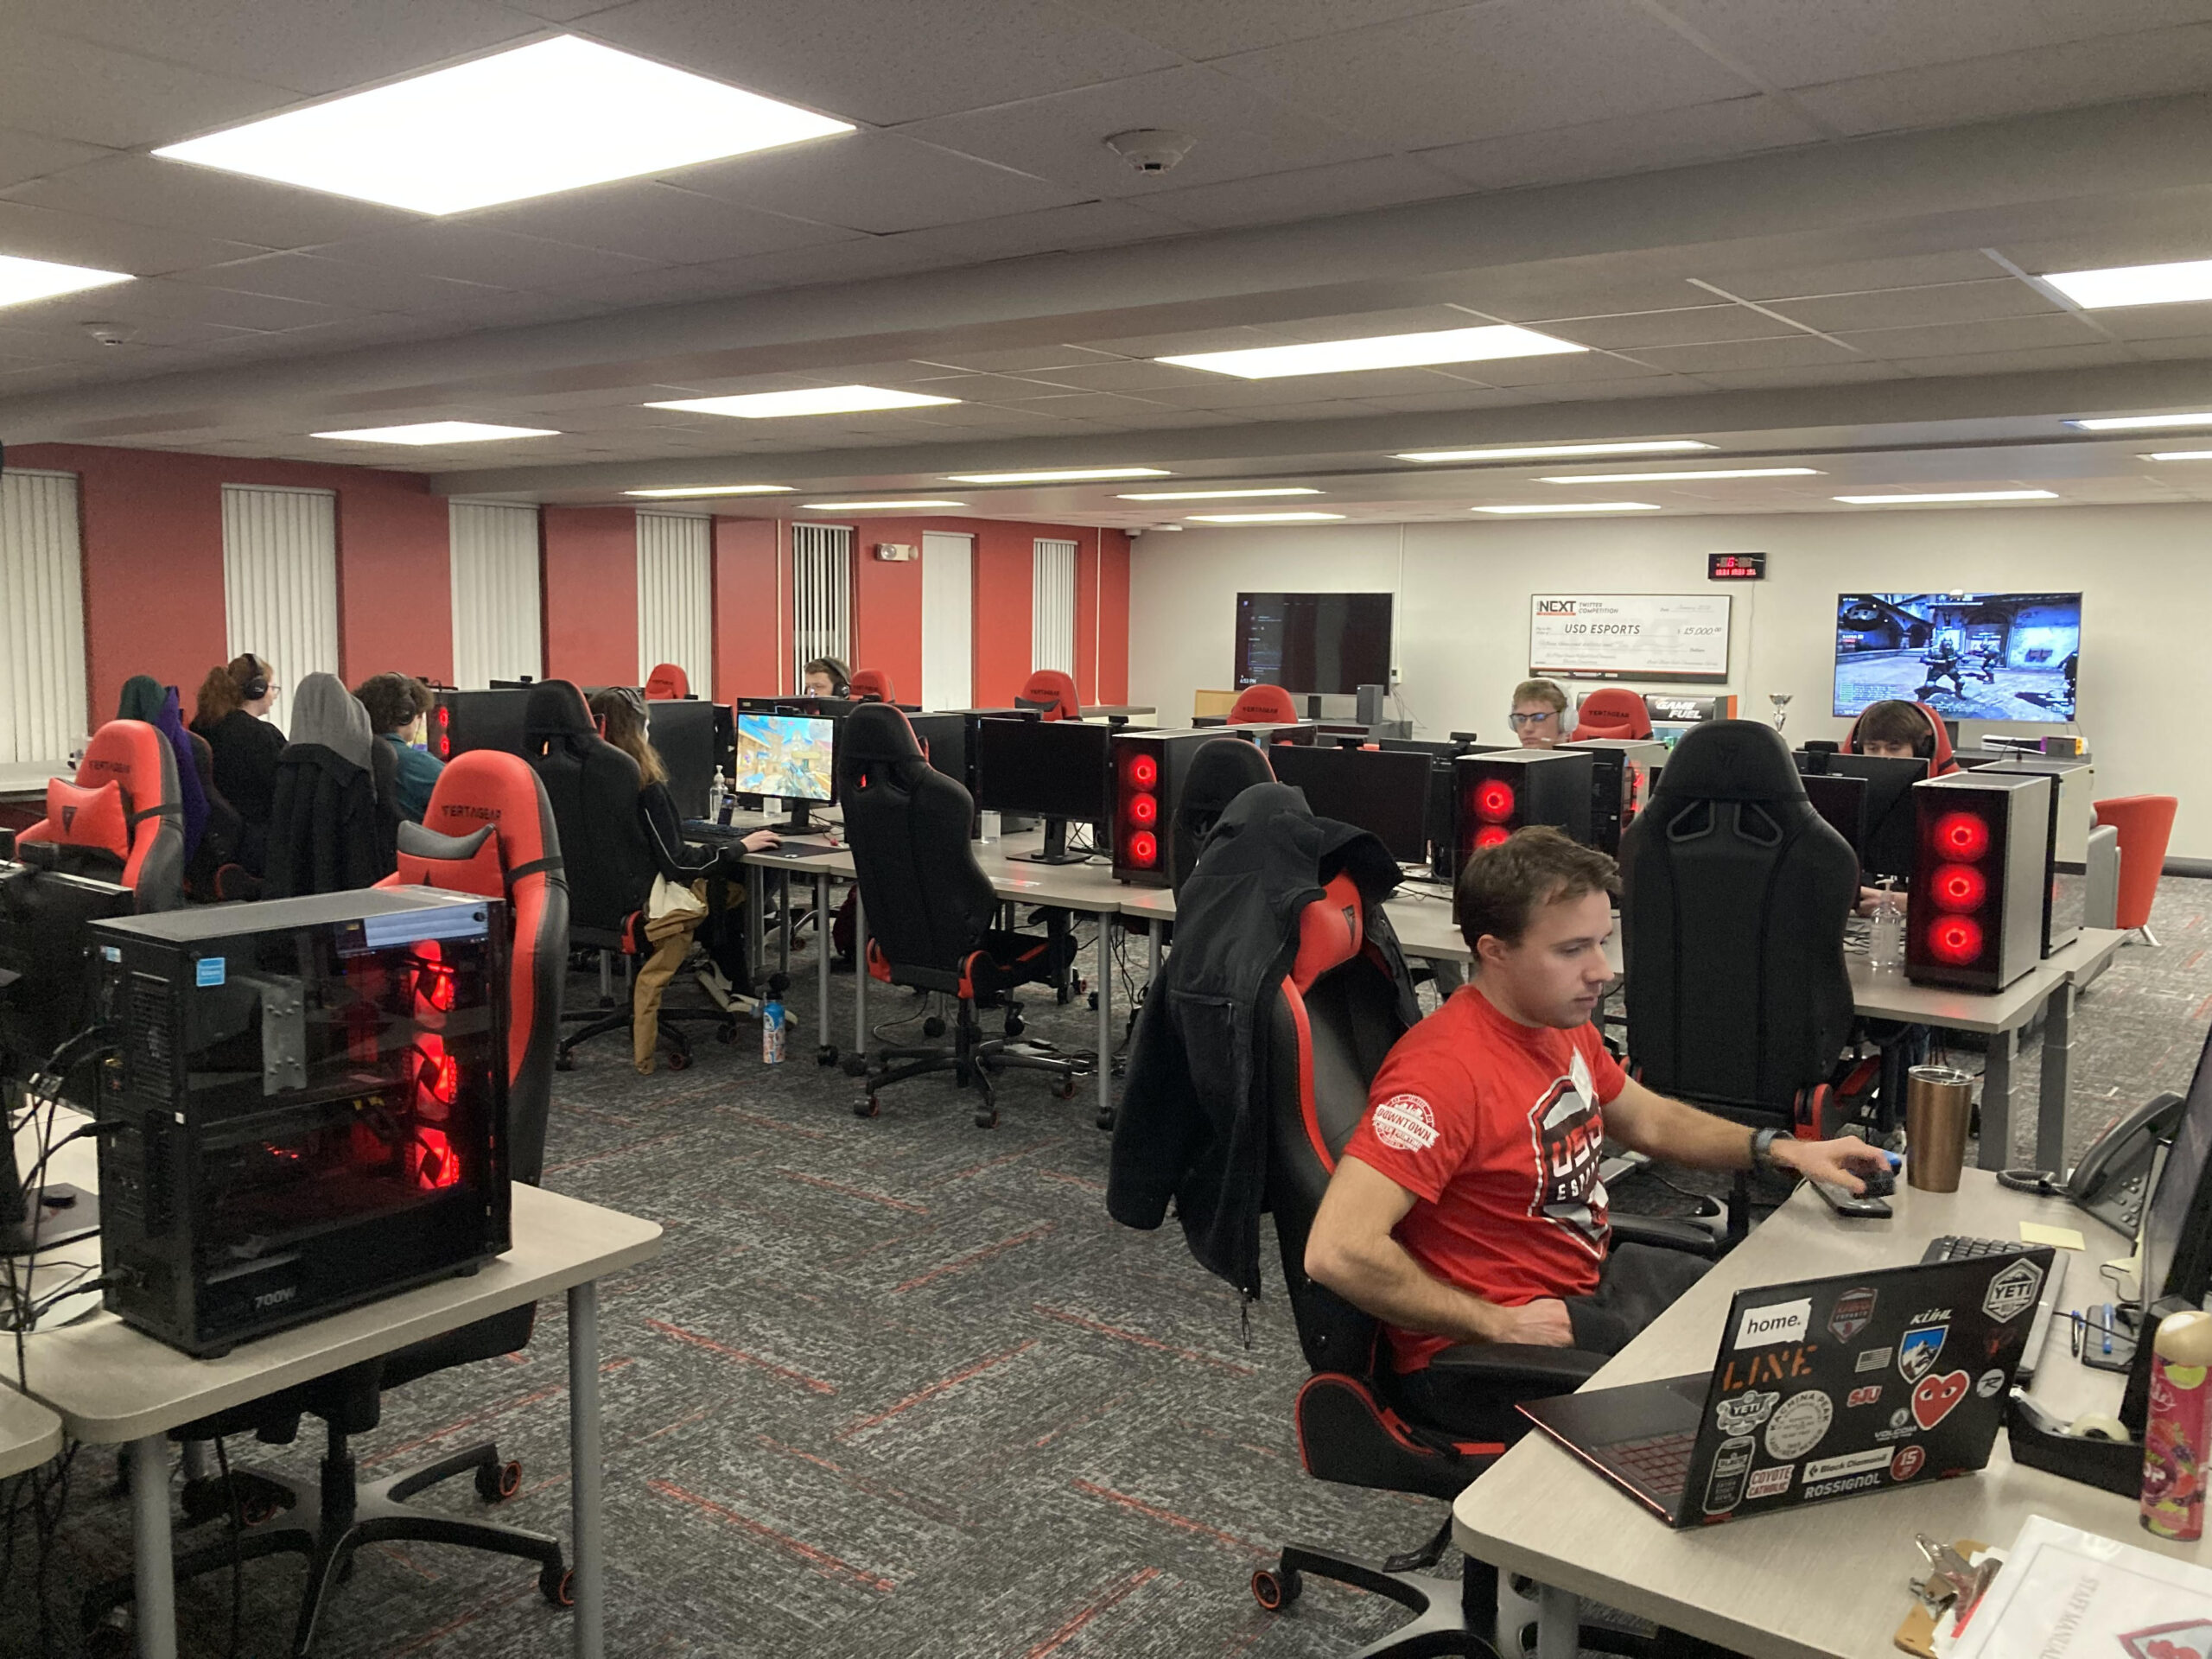 Esports on the rise at USD